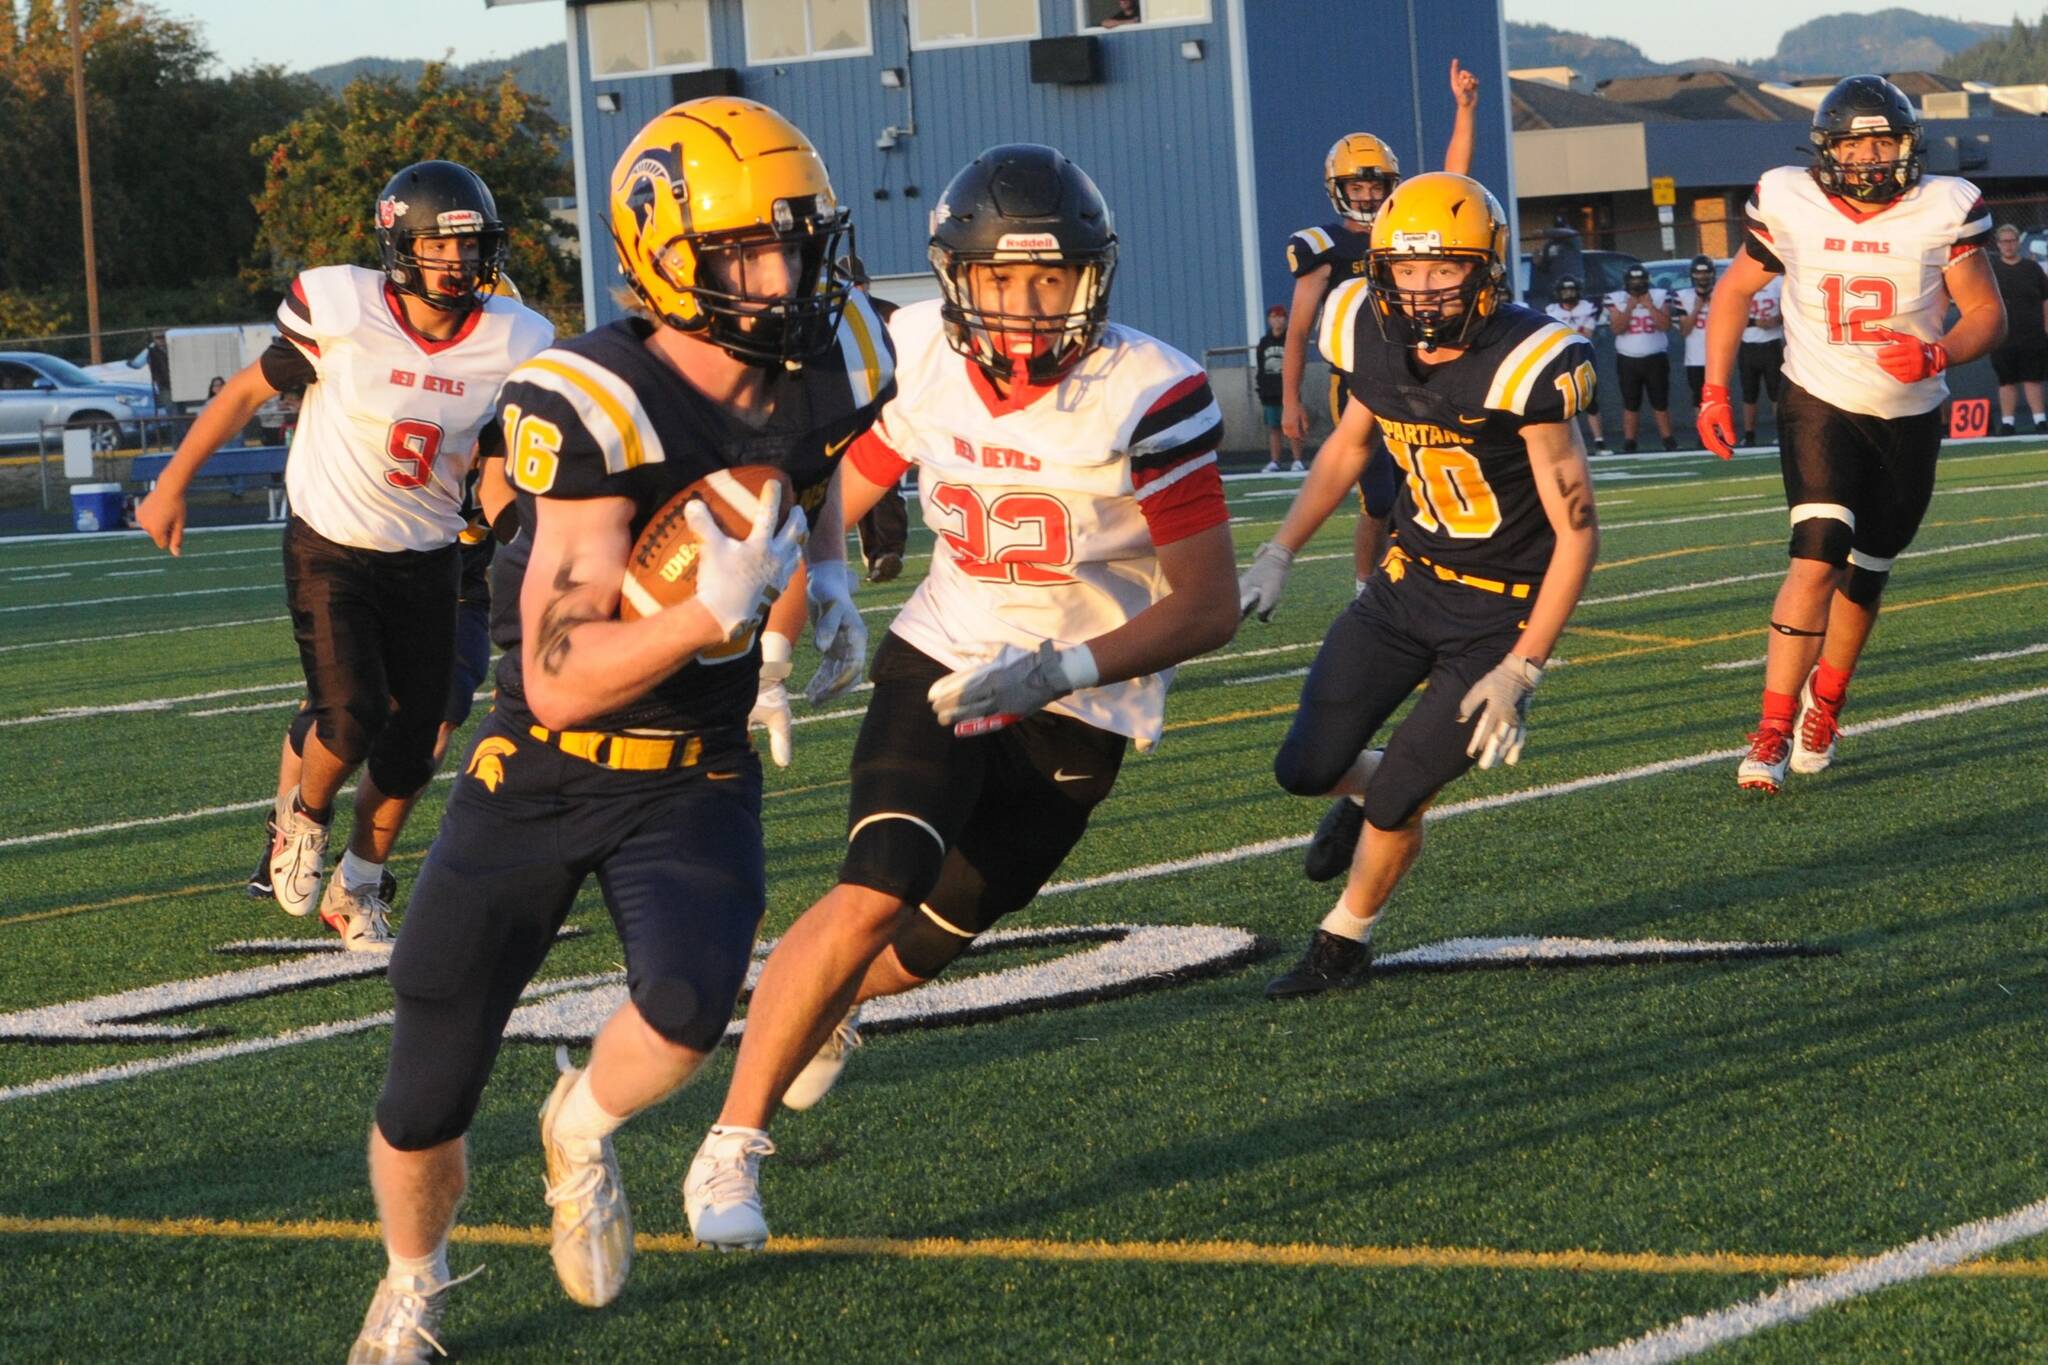 Forks’ Gunner Rogers in route to a TD. Also In the action are Spartan Landen Olson (10) Red Devils Josh Greene (9), Seactis Woodruff (32), and CJ Halttunen (12). Photo by Lonnie Archibald